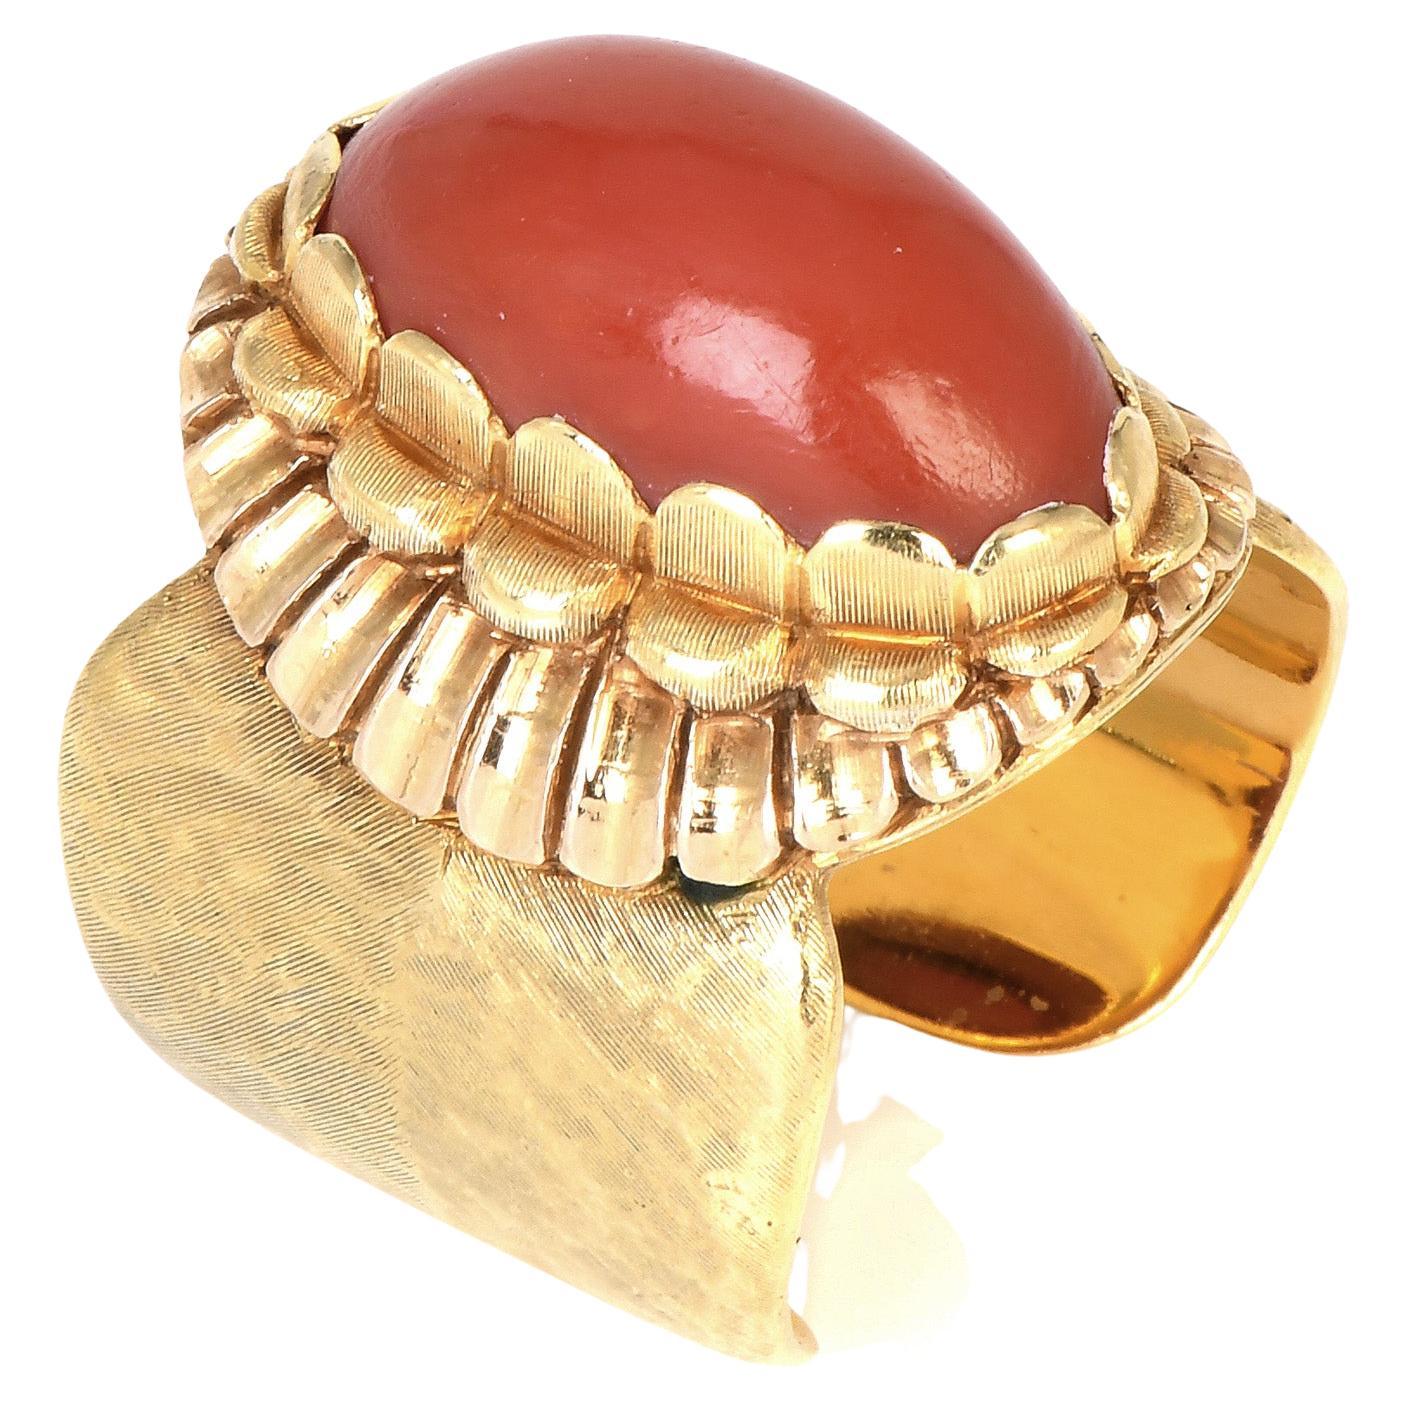 Buccellati Vintage Red Coral 18K Yellow Gold Retro Wide Cuff Cocktail Ring